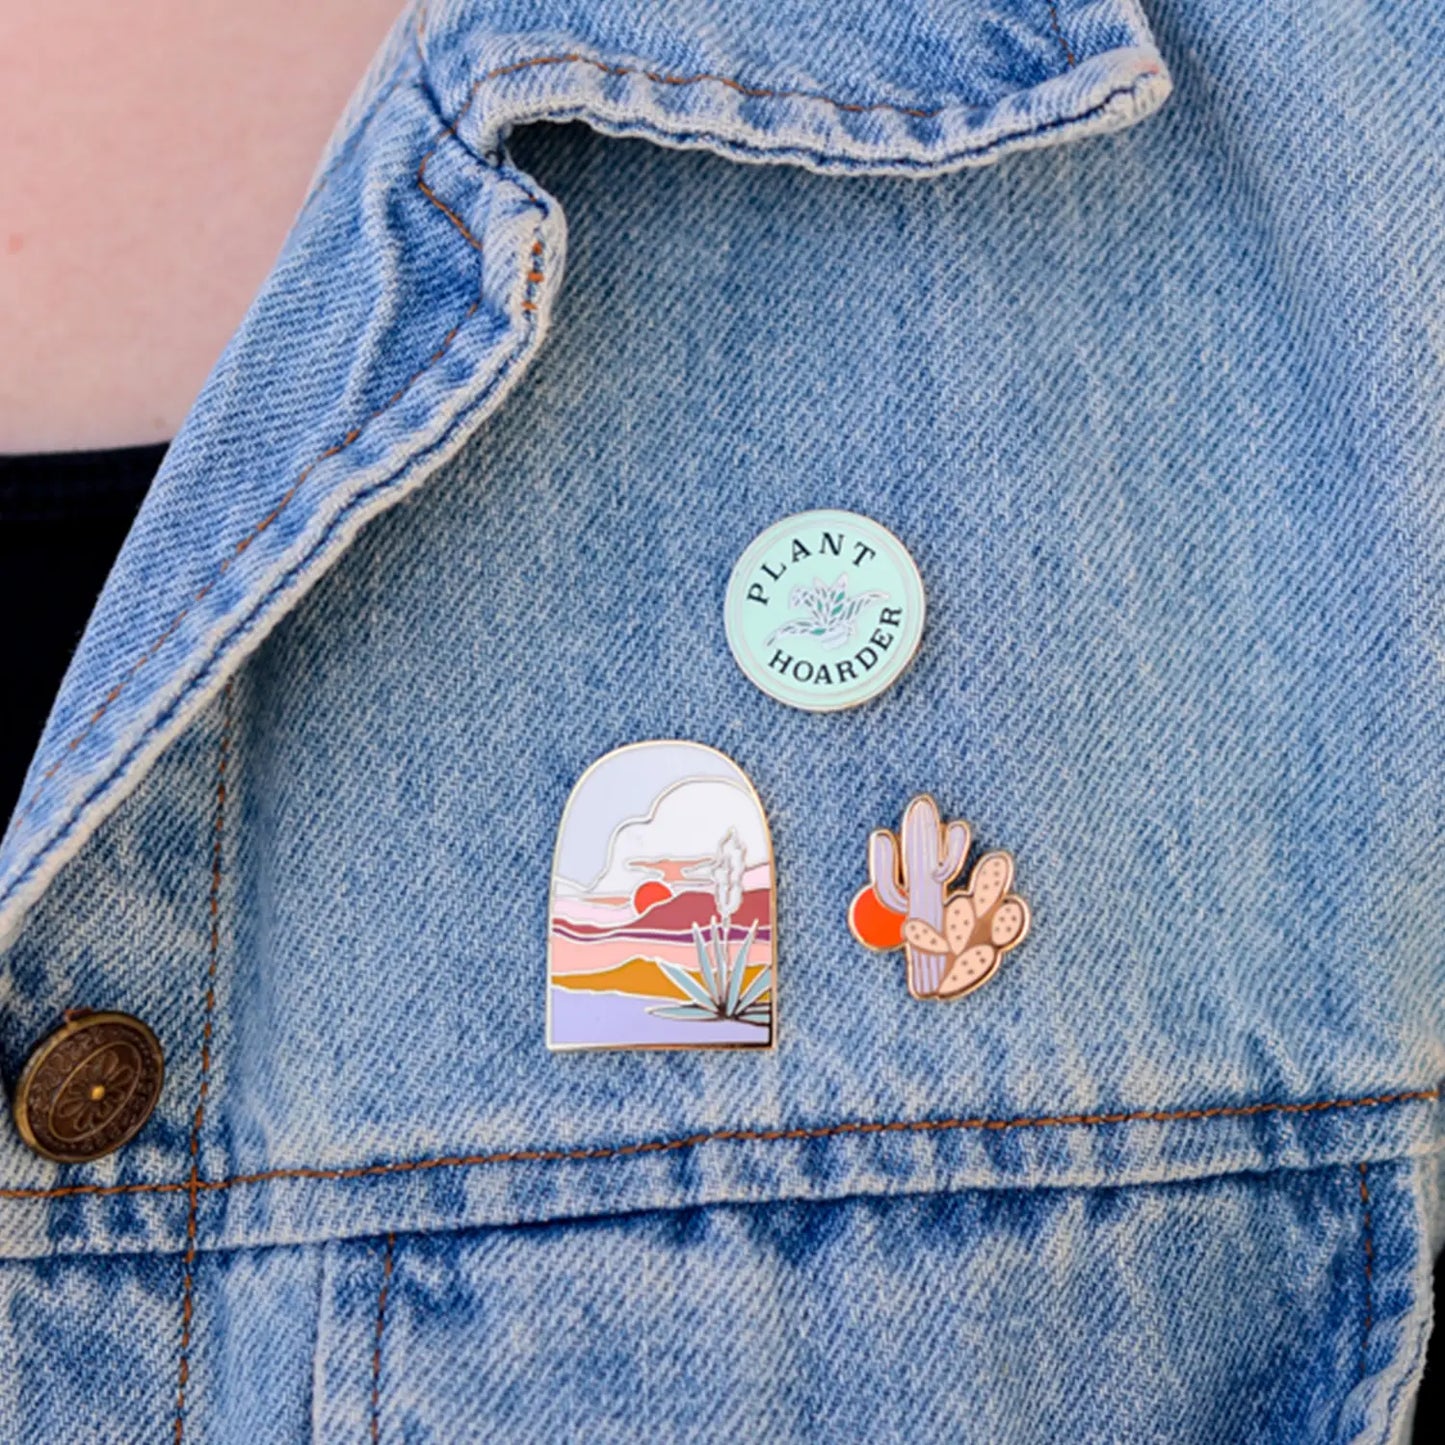 Agave Sunset Enamel Pin - Moon Room Shop and Wellness